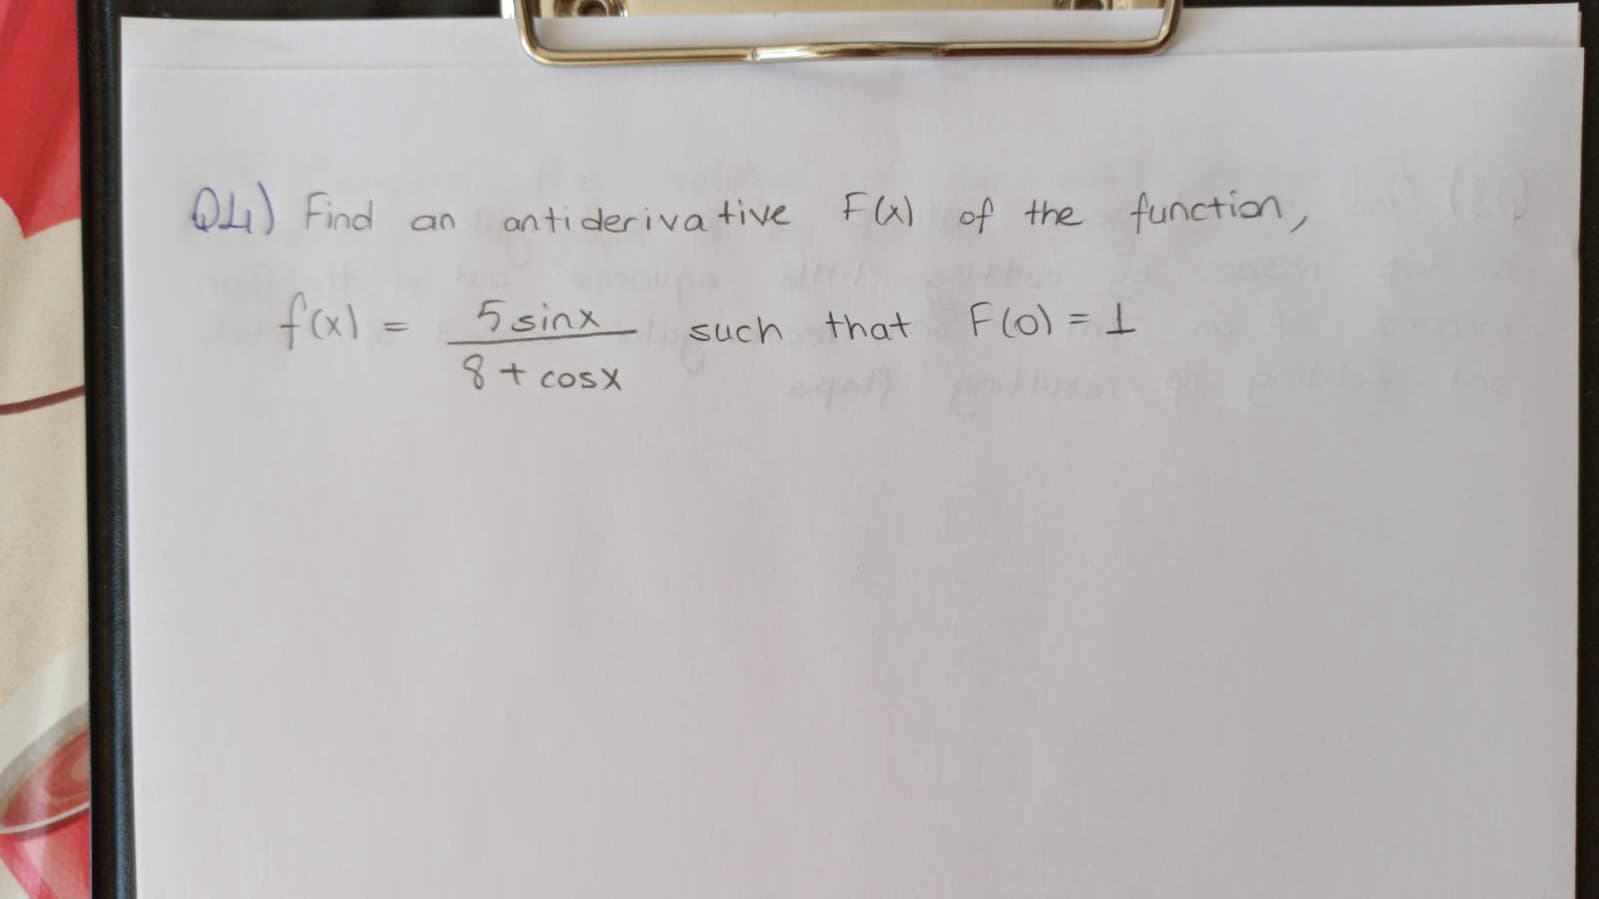 Find
n anti deriva tive
Fa) of the function,
an
fal=
5 sinx
such that
Flo) ==
8+ cosX
